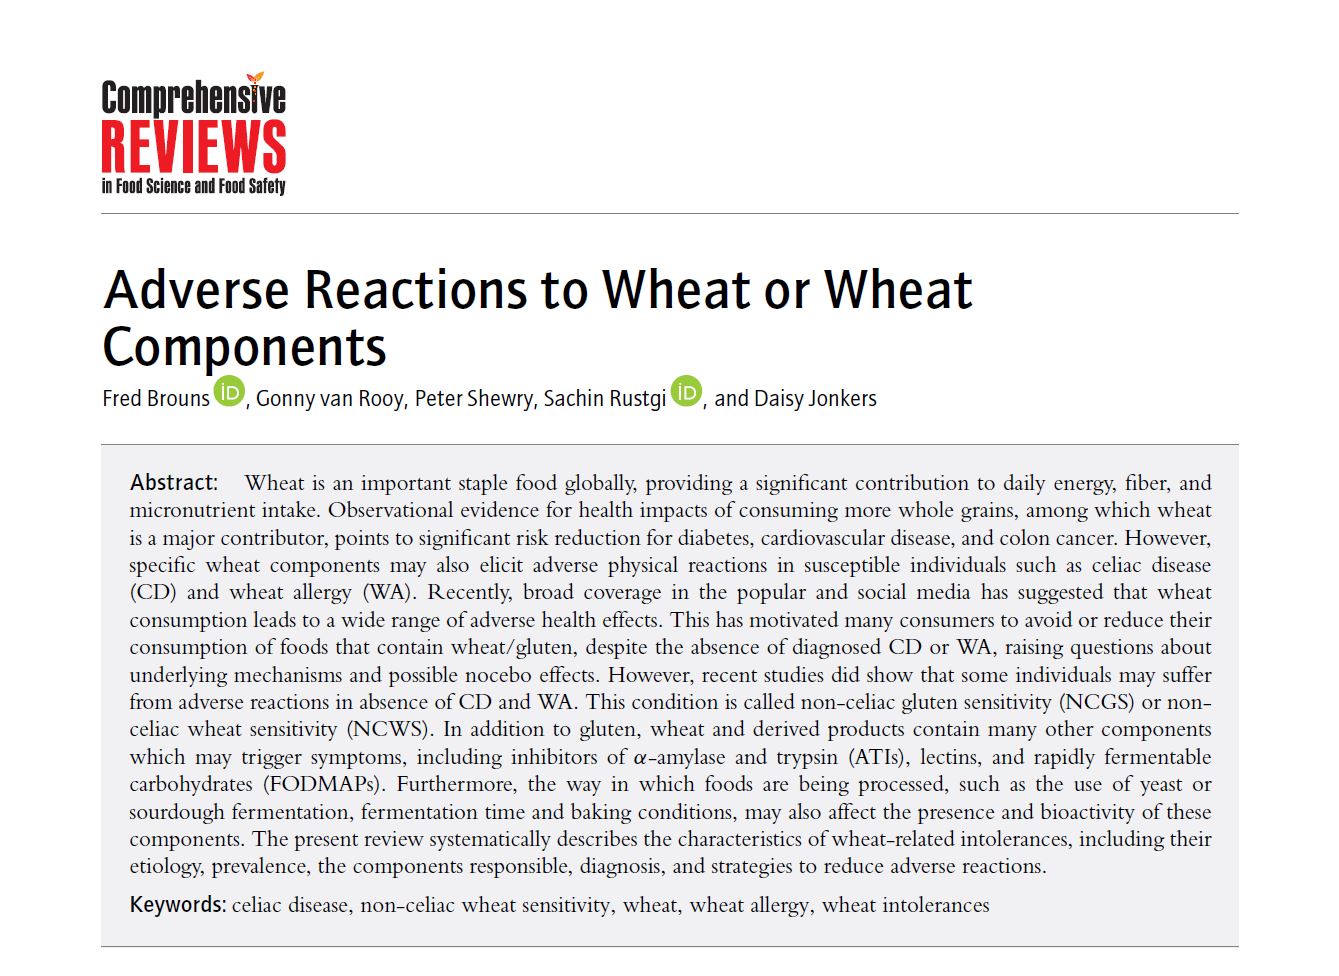 Comprehensive Reviews: Adverse Reactions to Wheat or Wheat Components